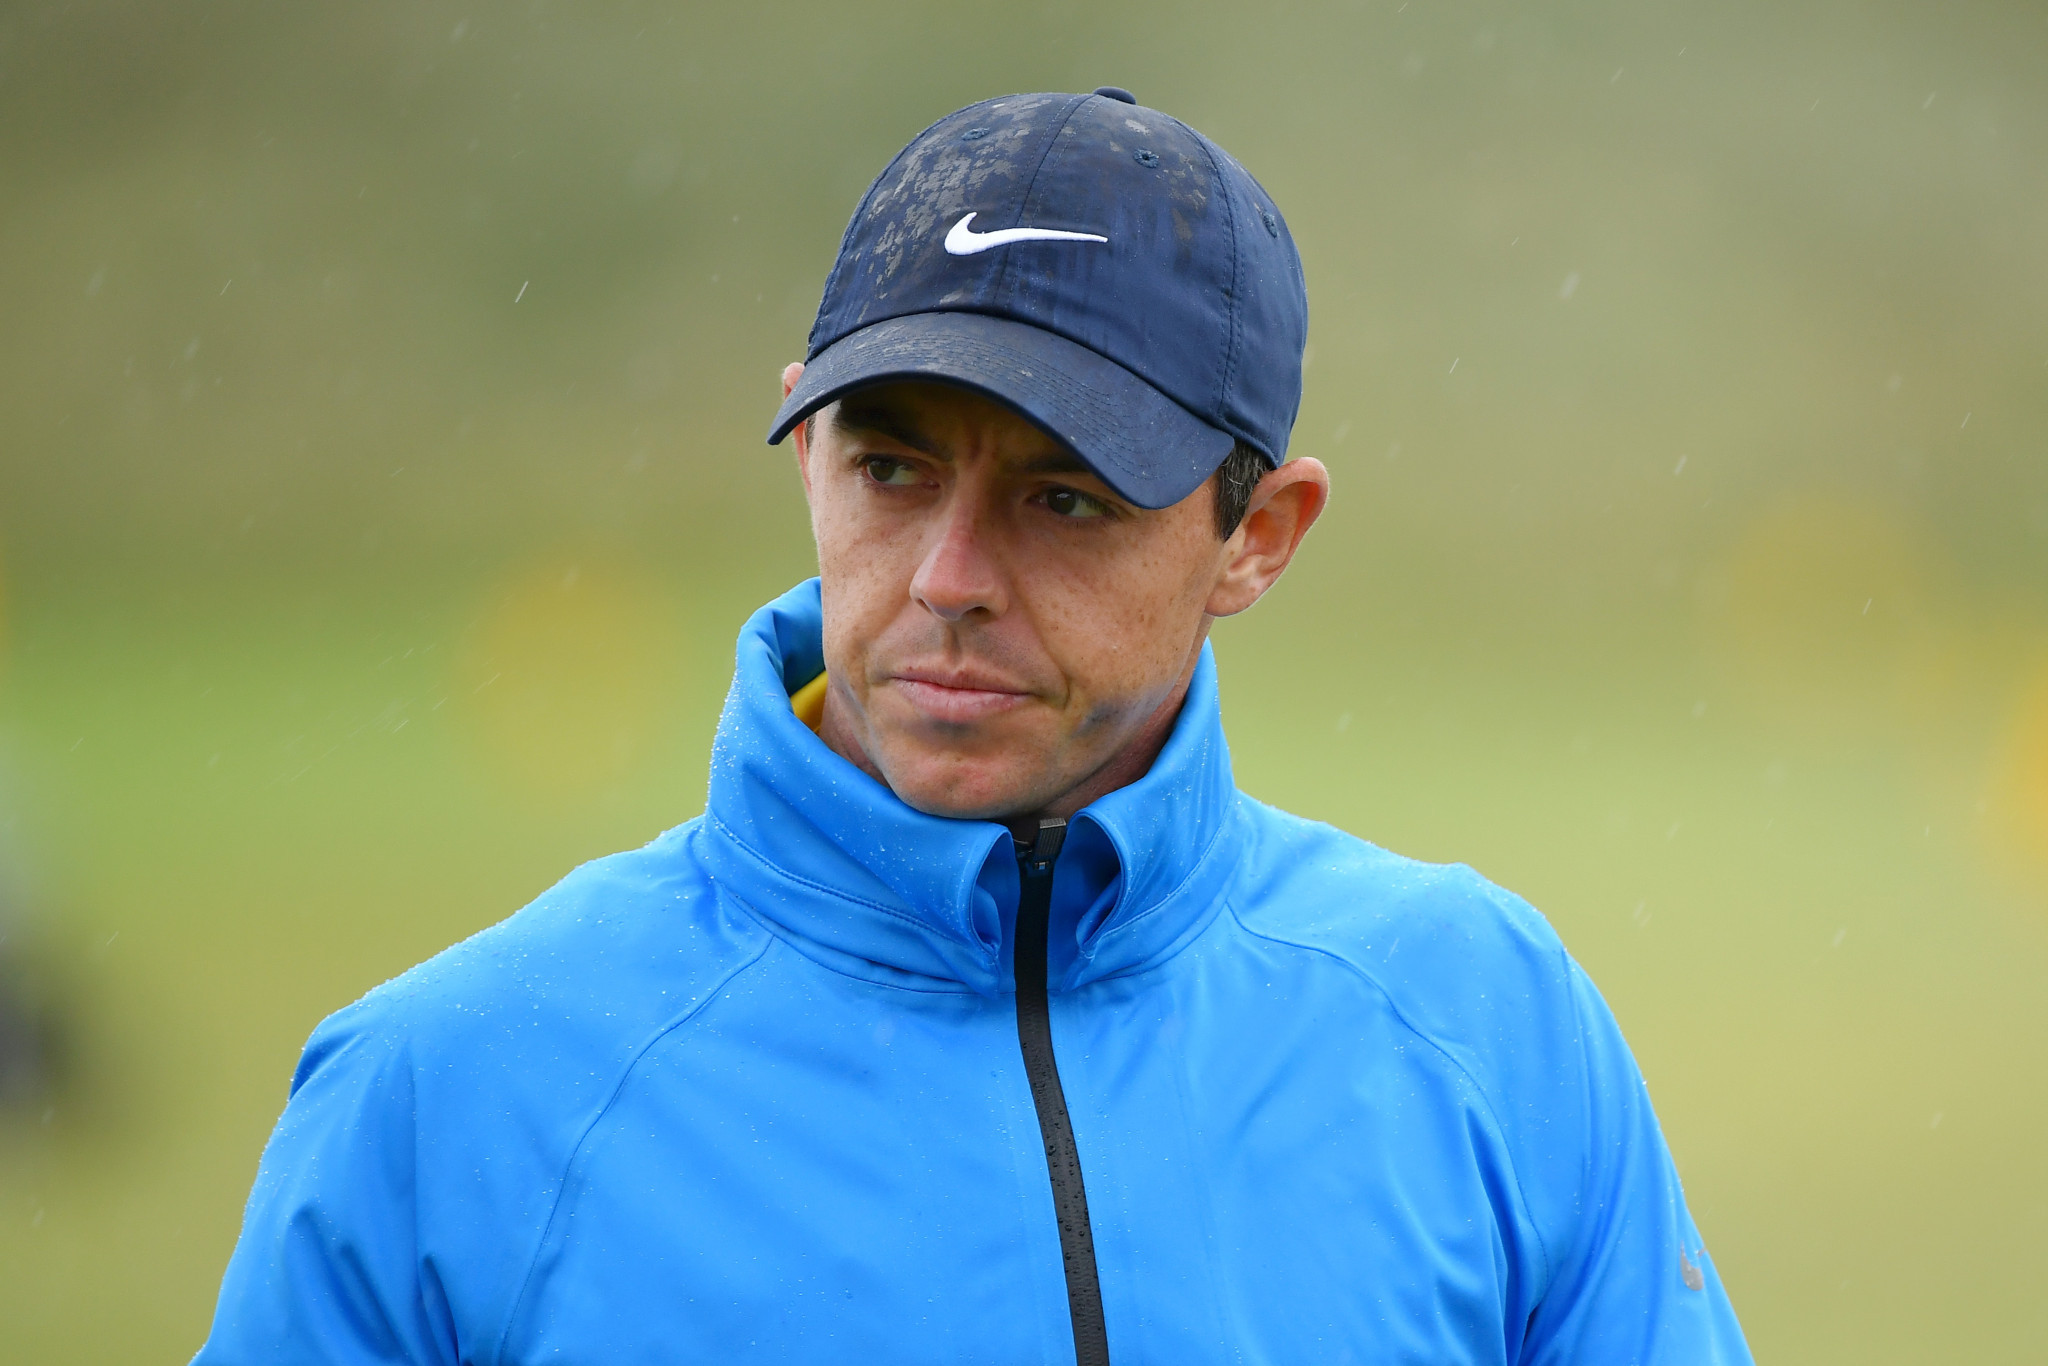 Rory McIlroy will be looking to end a five-year wait for a fifth major title when he competes at The Open in his home country of Northern Ireland this week ©Getty Images